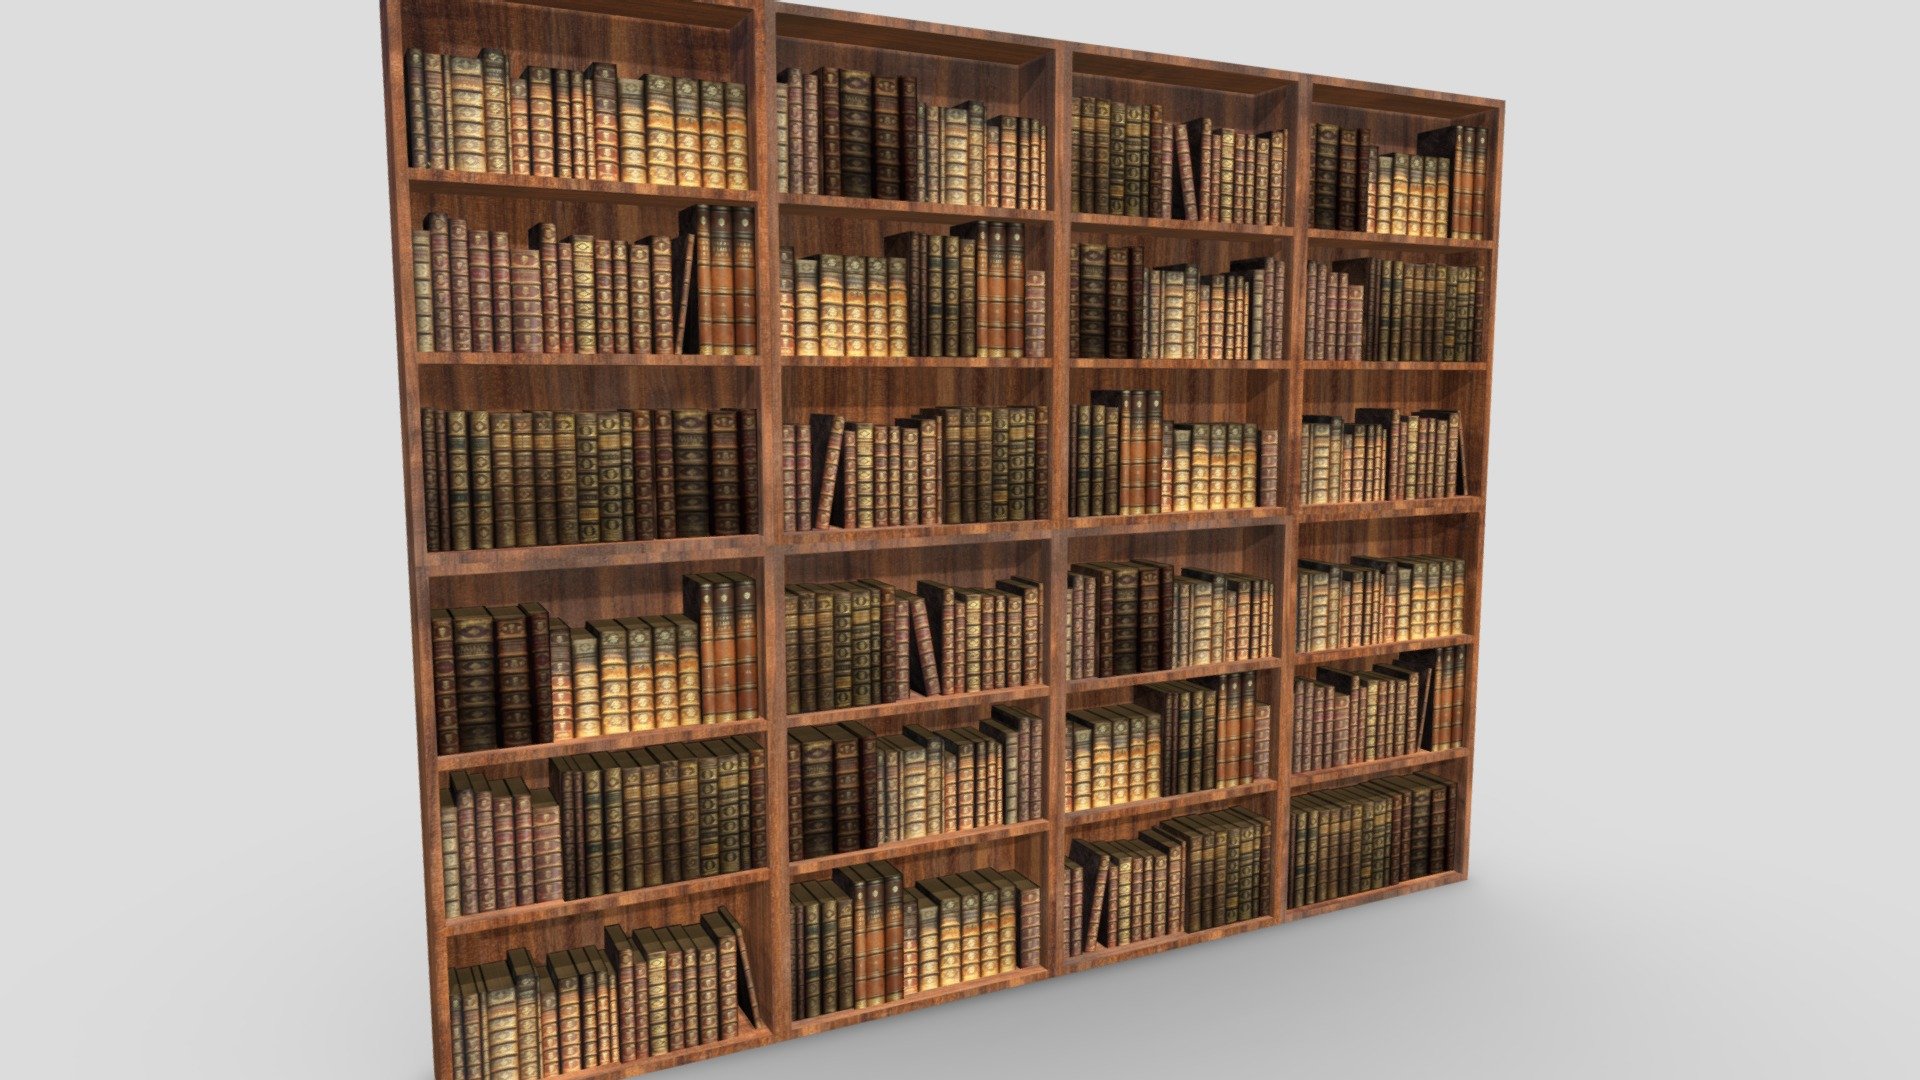 Low poly bookshelf - perfect for game engines. Textures include color, bump, spec, and roughness maps. There are 4 unique shelf models which can easily be combined and duplicated to create a whole library 3d model